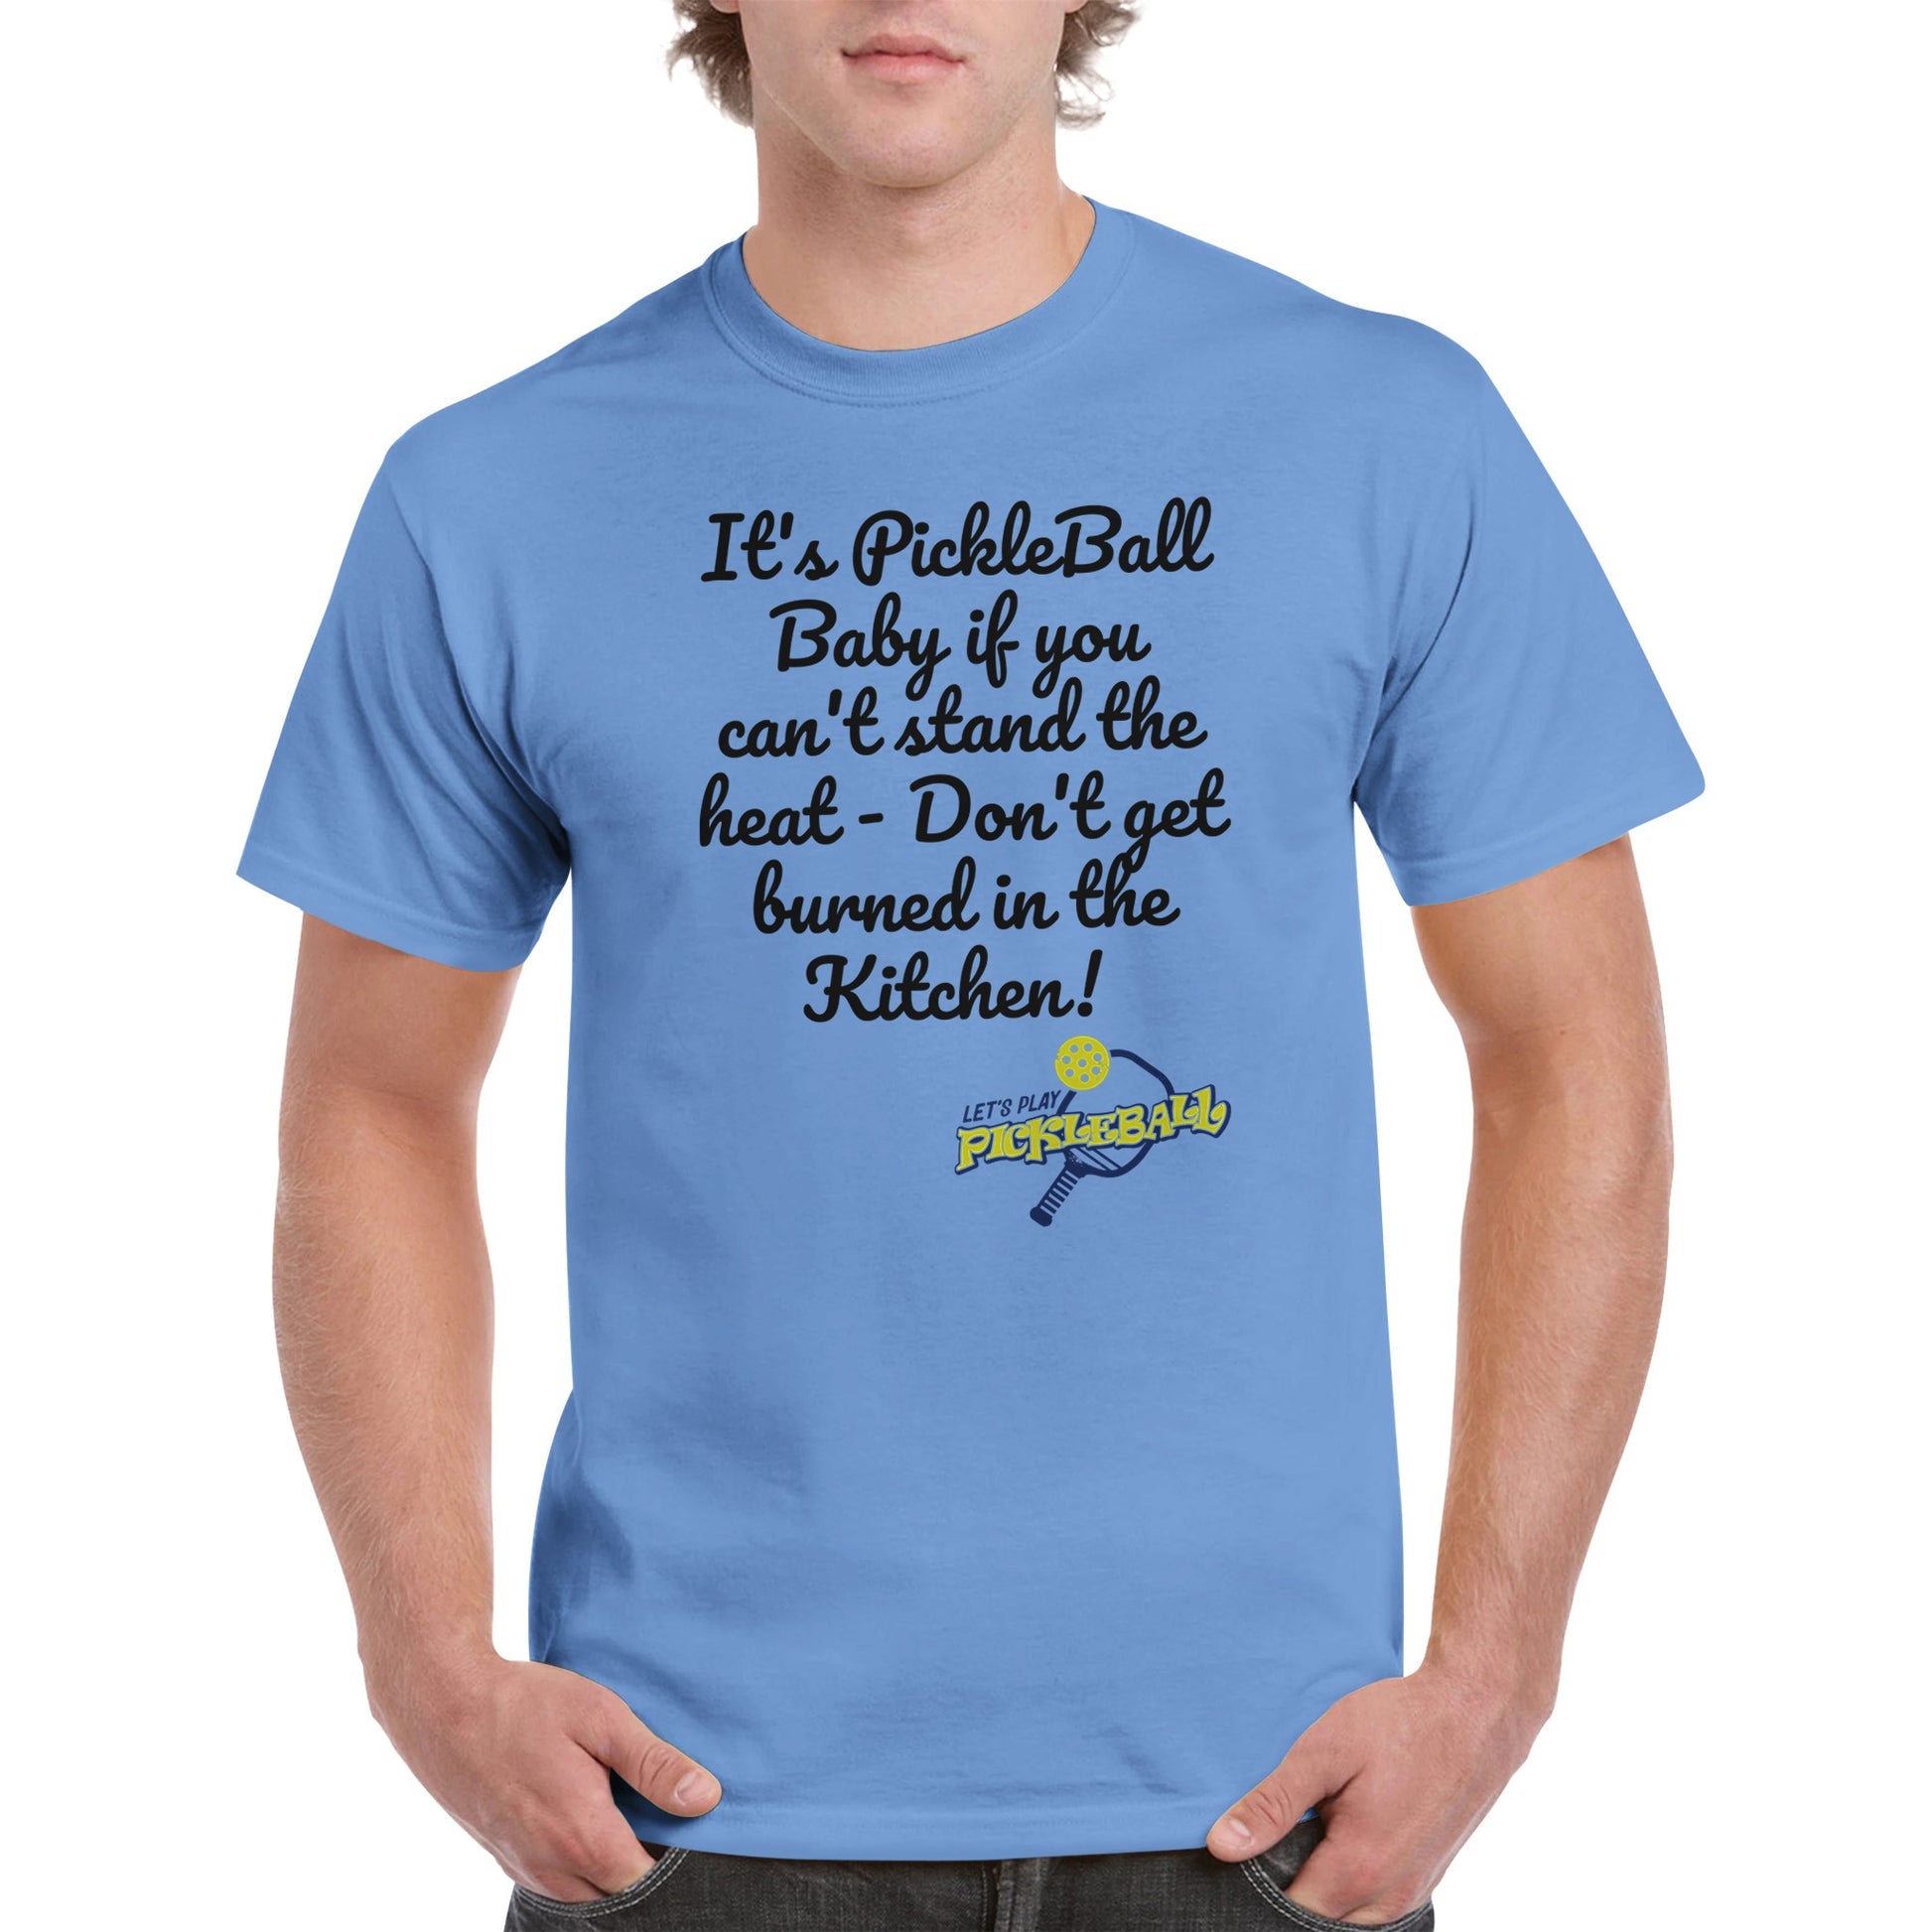 Carolina Blue comfortable Unisex Crewneck heavyweight cotton t-shirt with funny saying It’s PickleBall Baby if can’t stand the heat – Don’t get burned in the Kitchen!  and Let’s Play Pickleball logo on the front from WhatYa Say Apparel worn by blonde-haired male front view.